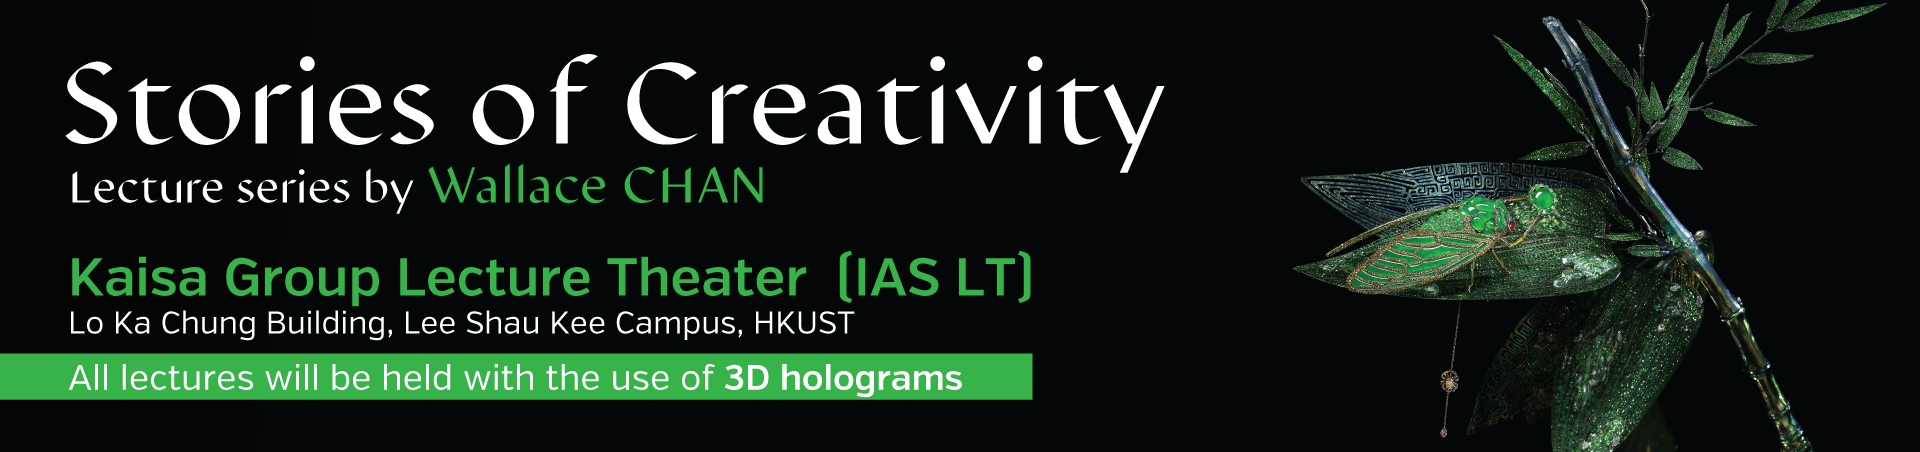 Event - Artistry and Creativity by Mr. Wallace CHAN & Mr. James PUTMAN (Sep 20)